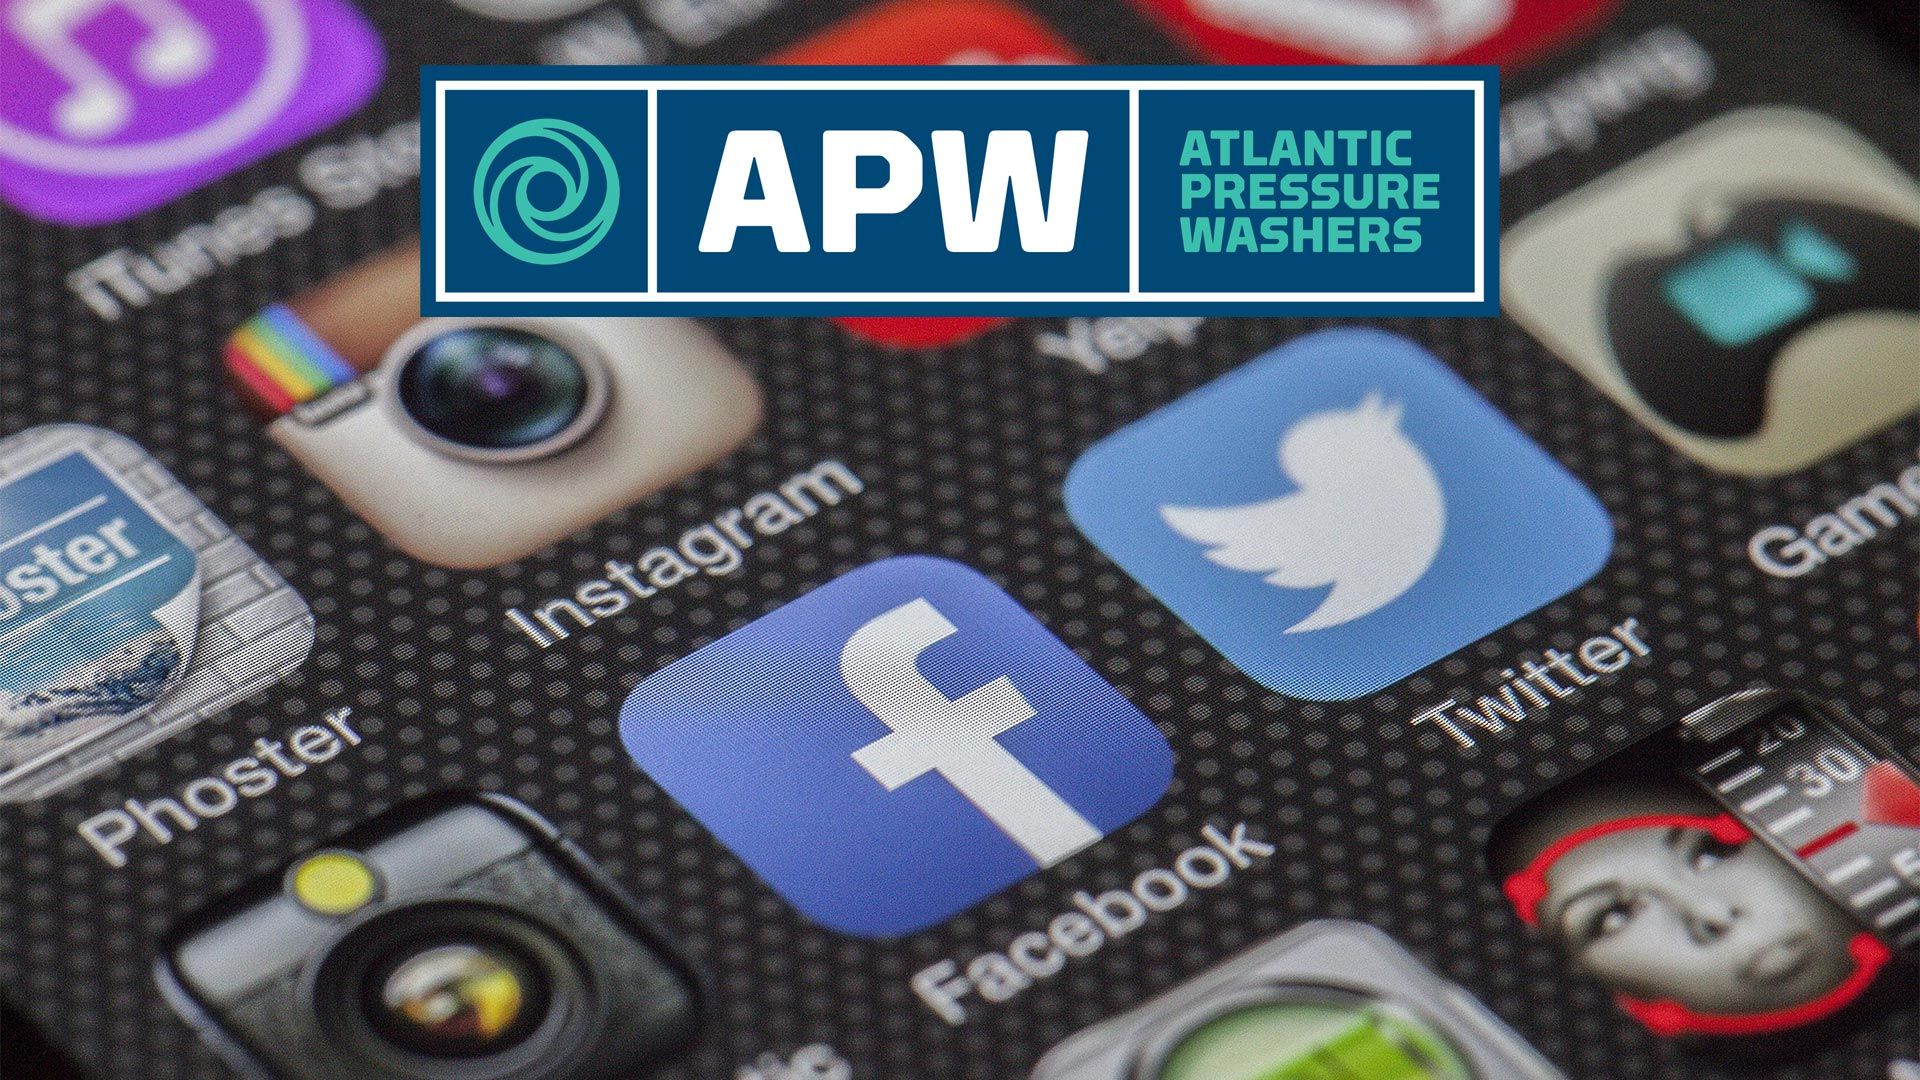 Follow Atlantic Pressure Washers in all of the major social networks